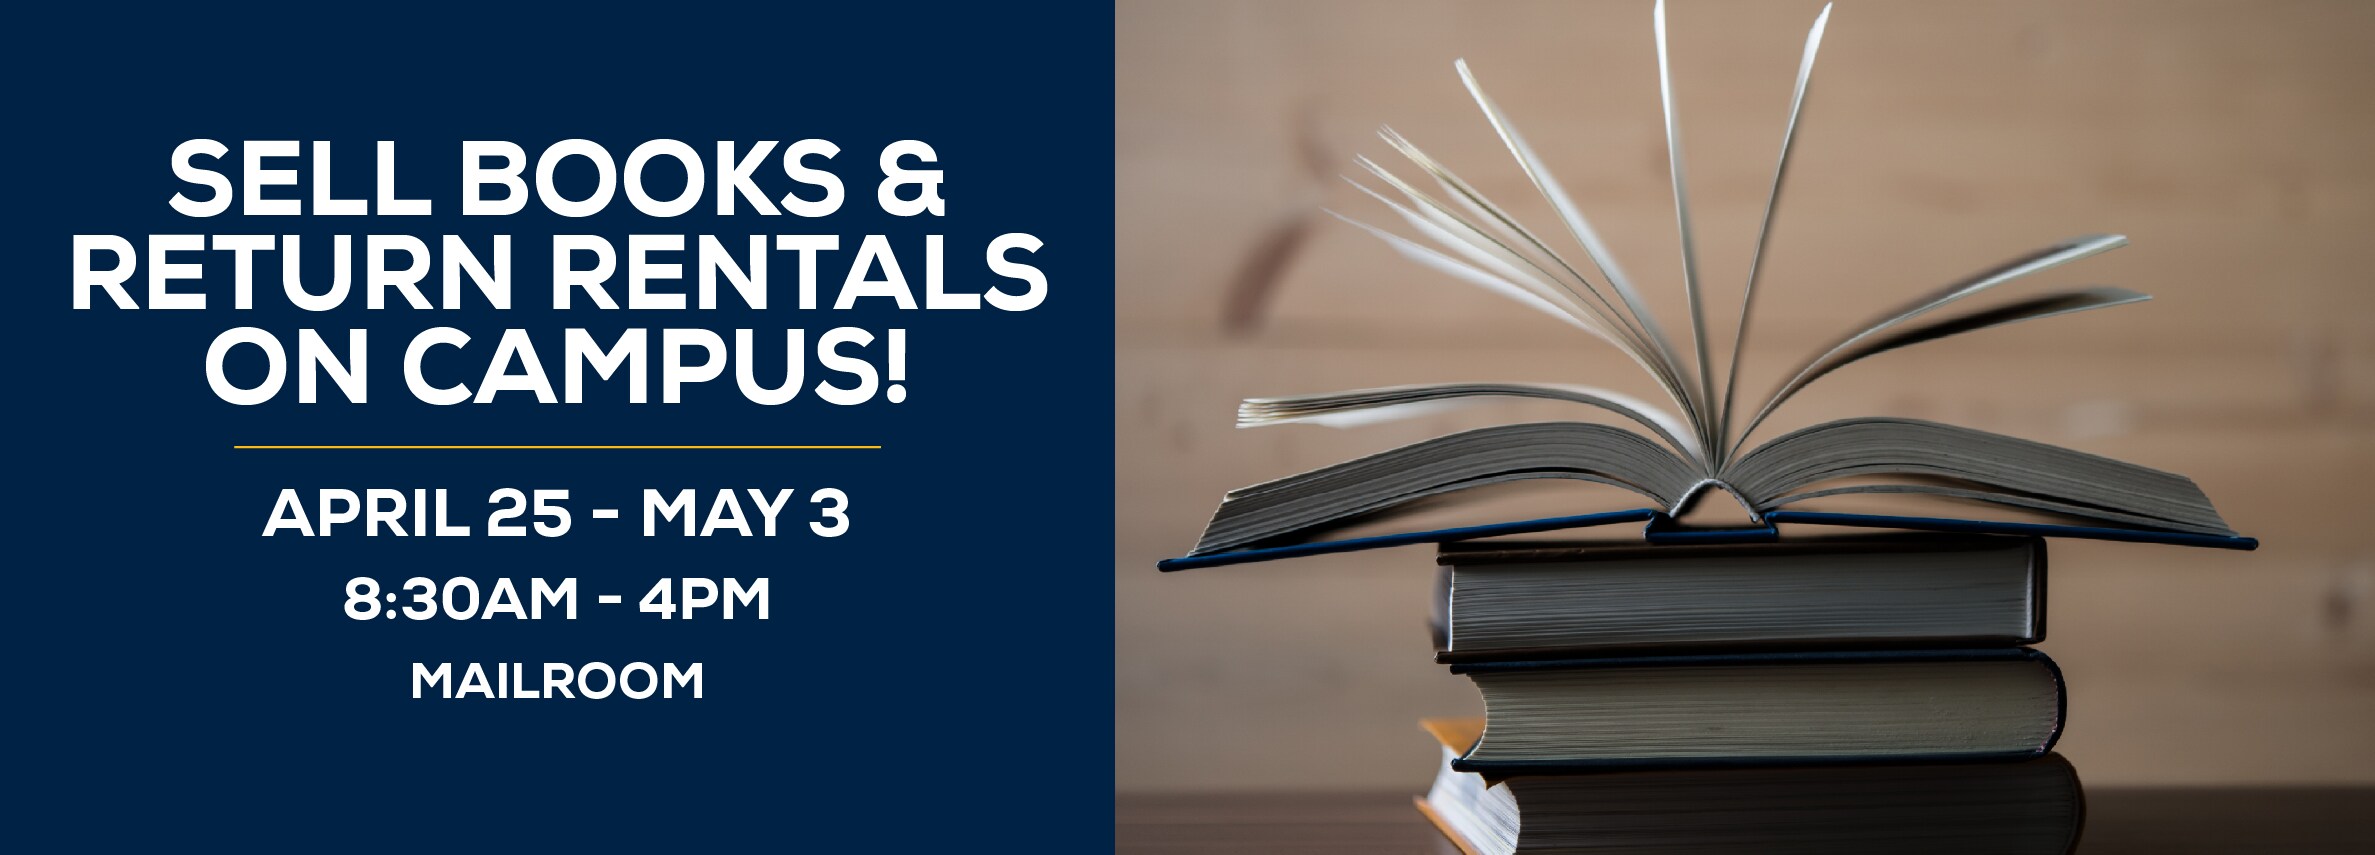 Sell books and return rentals on campus! April 25 - May 3. 8:30am to 4pm in the Mailroom.